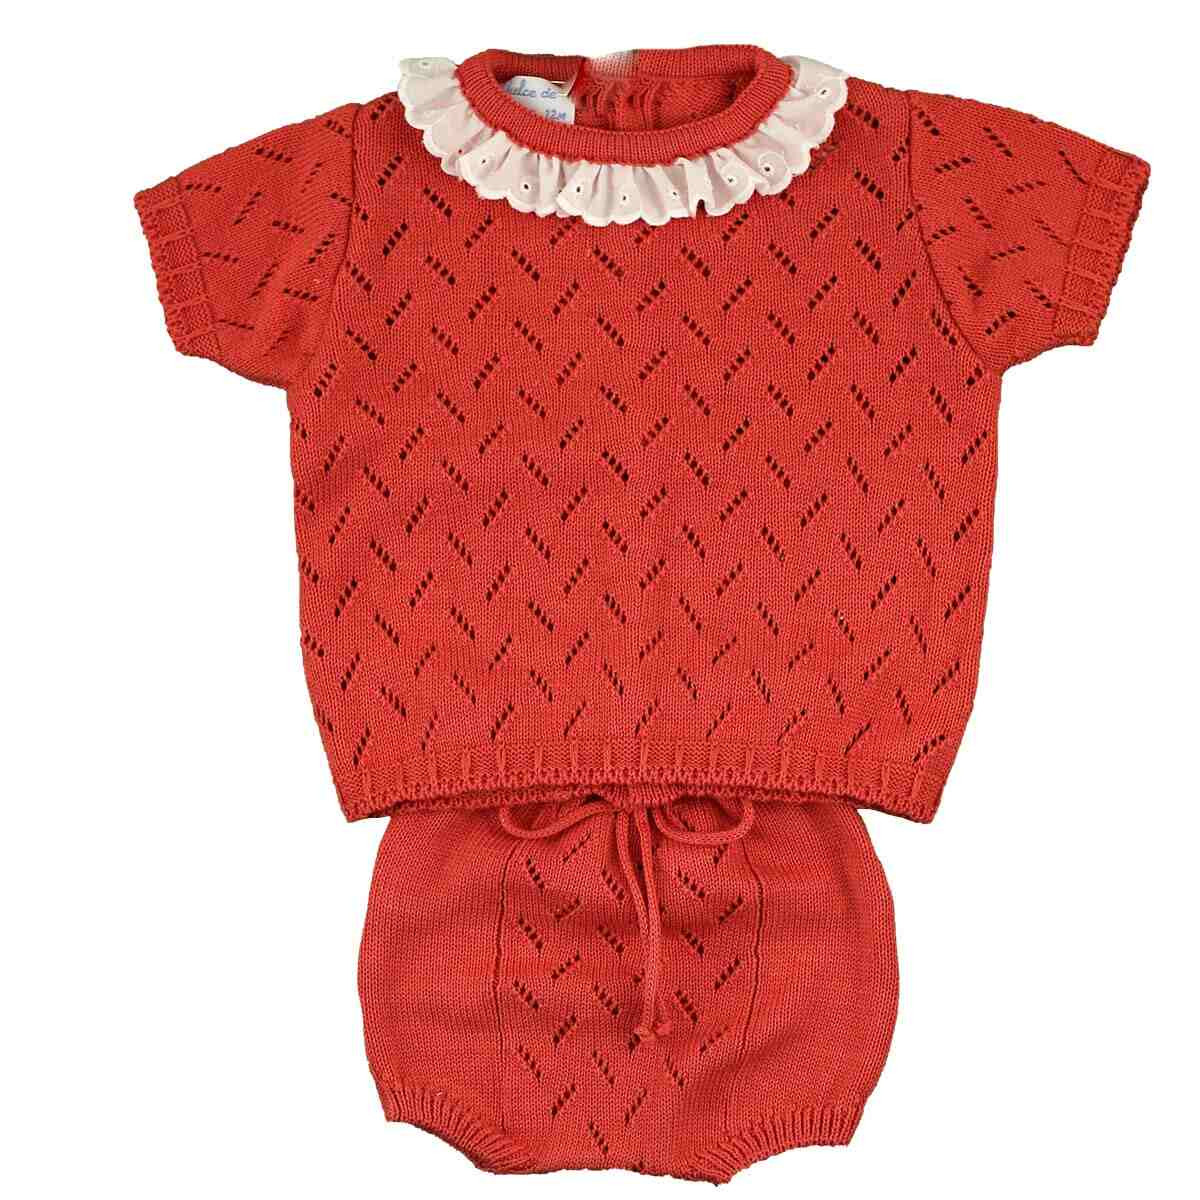 KNITTED BLOUSE WITH LACE AND NAPPY COVER DULCE DE FRESA - 1